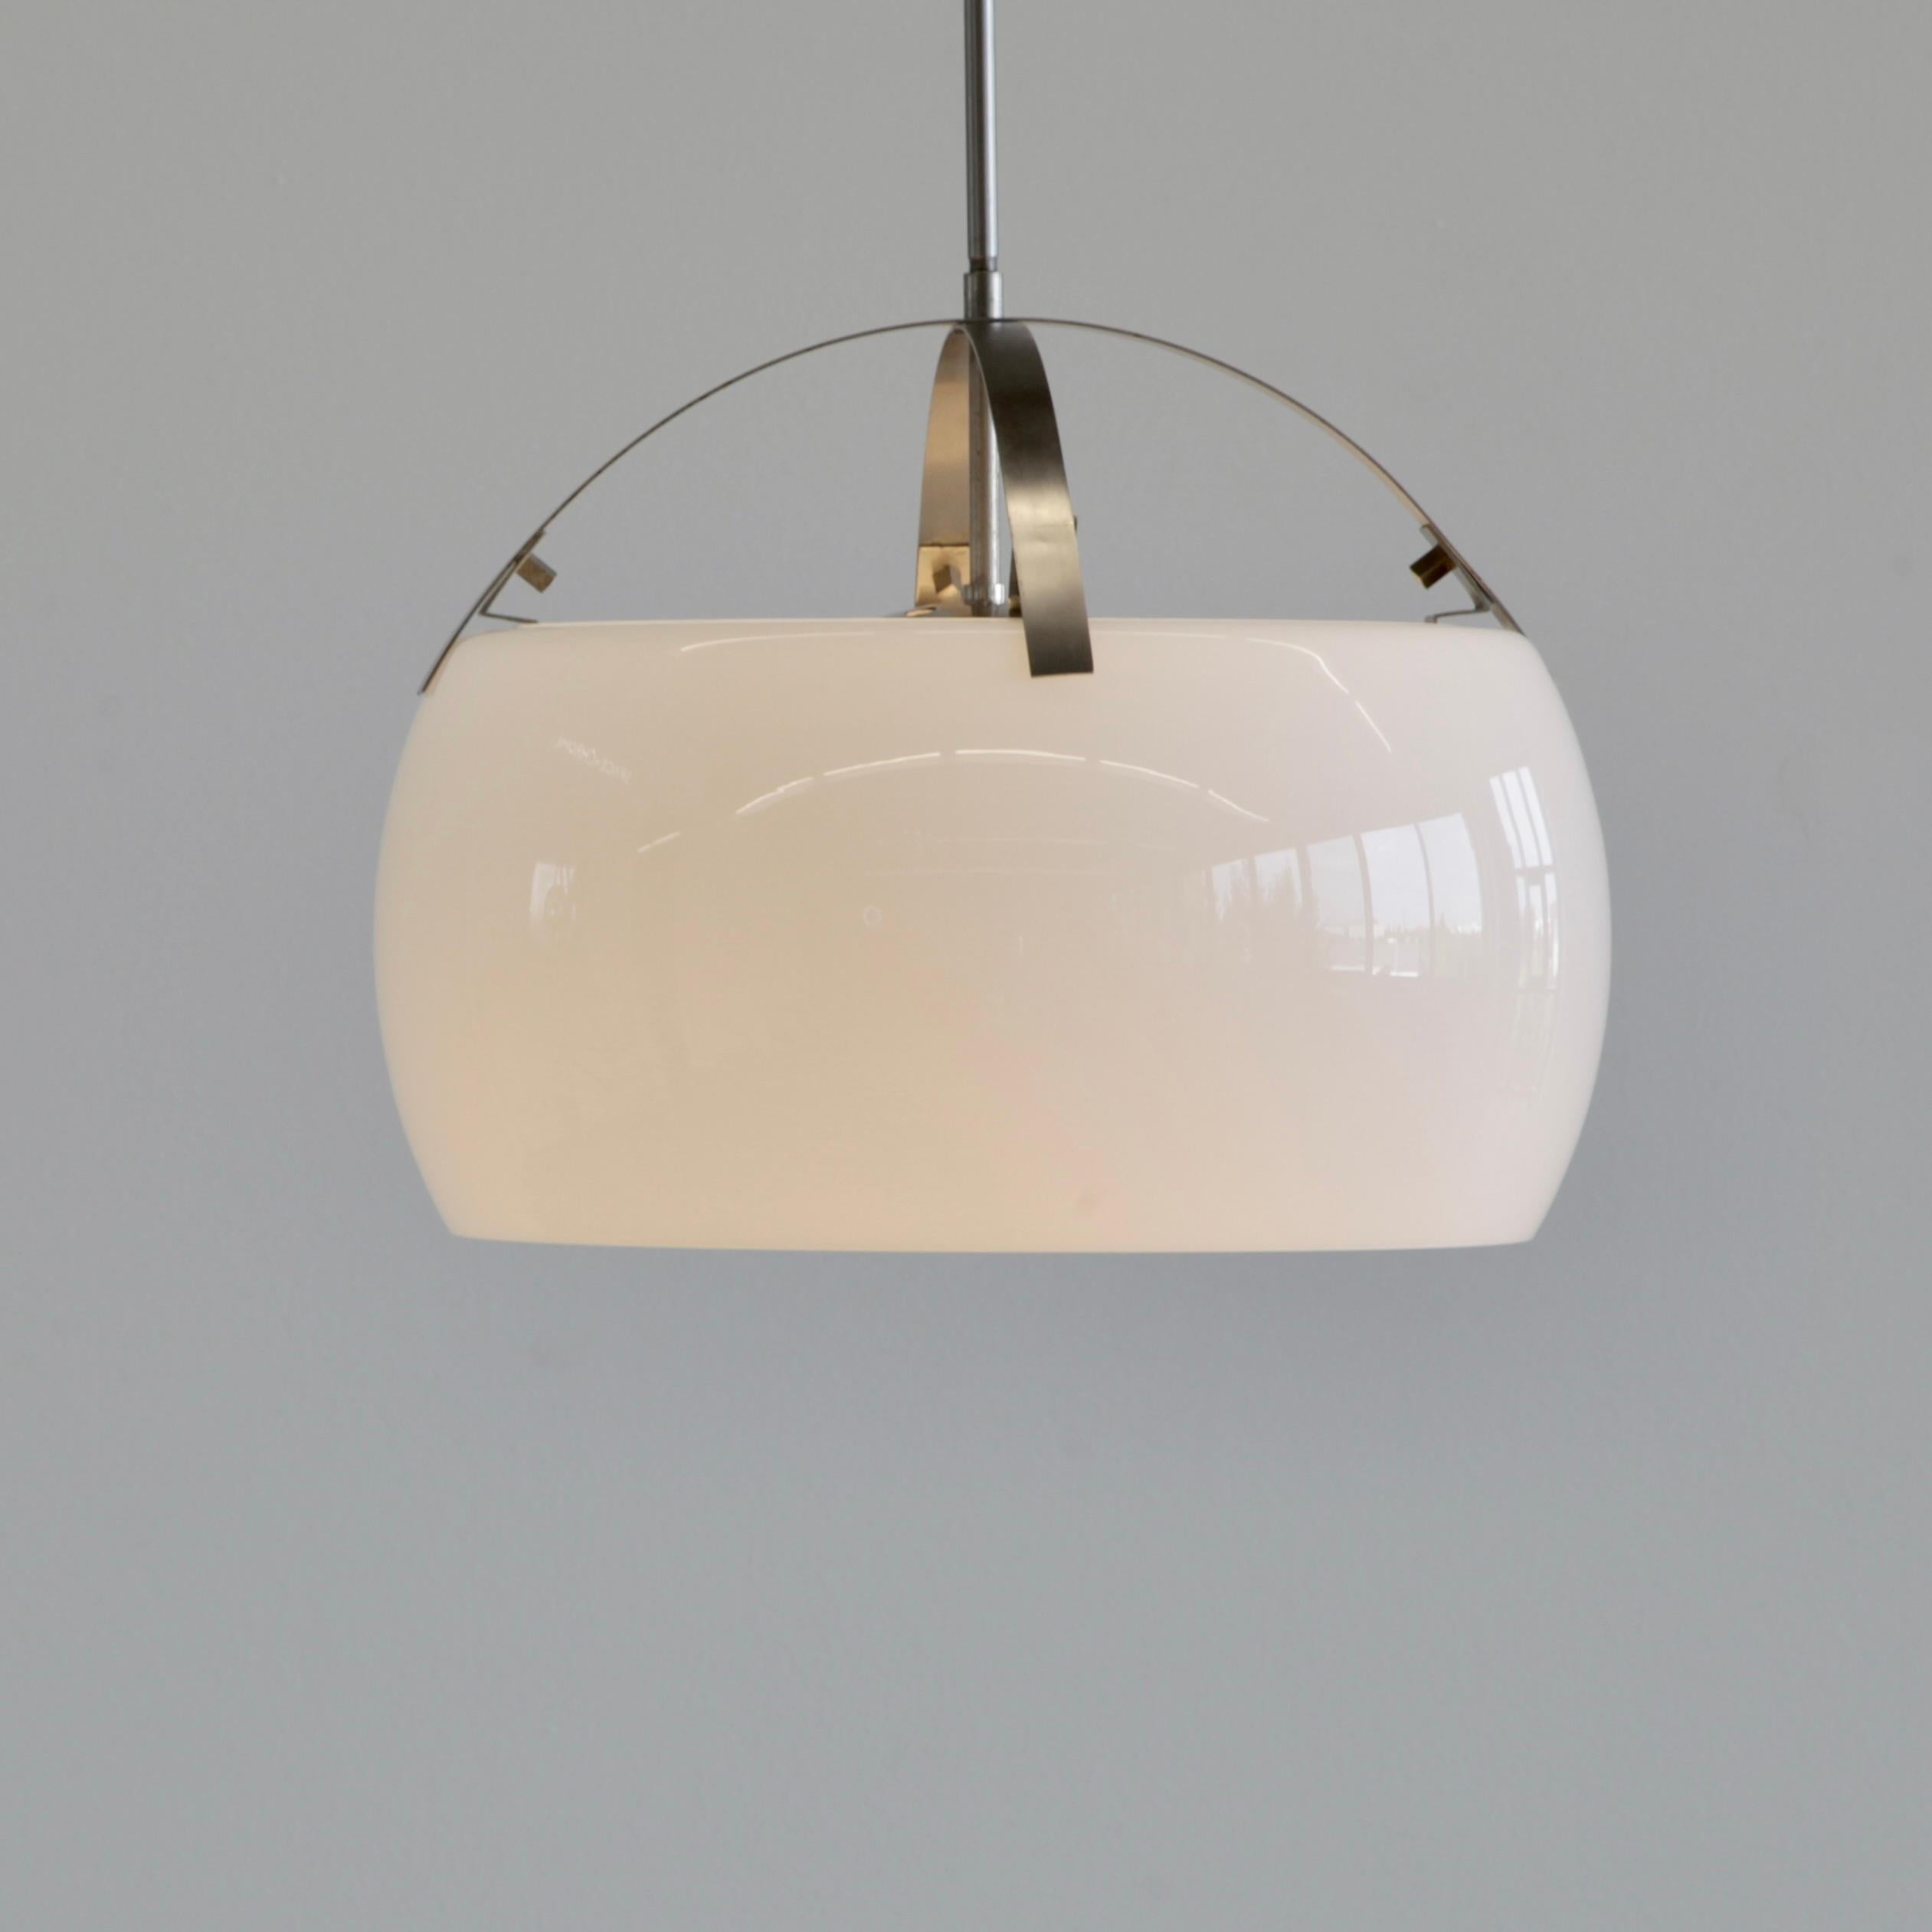 Mid-20th Century Omega Hanging Lamp by Vico Magistretti, 1962